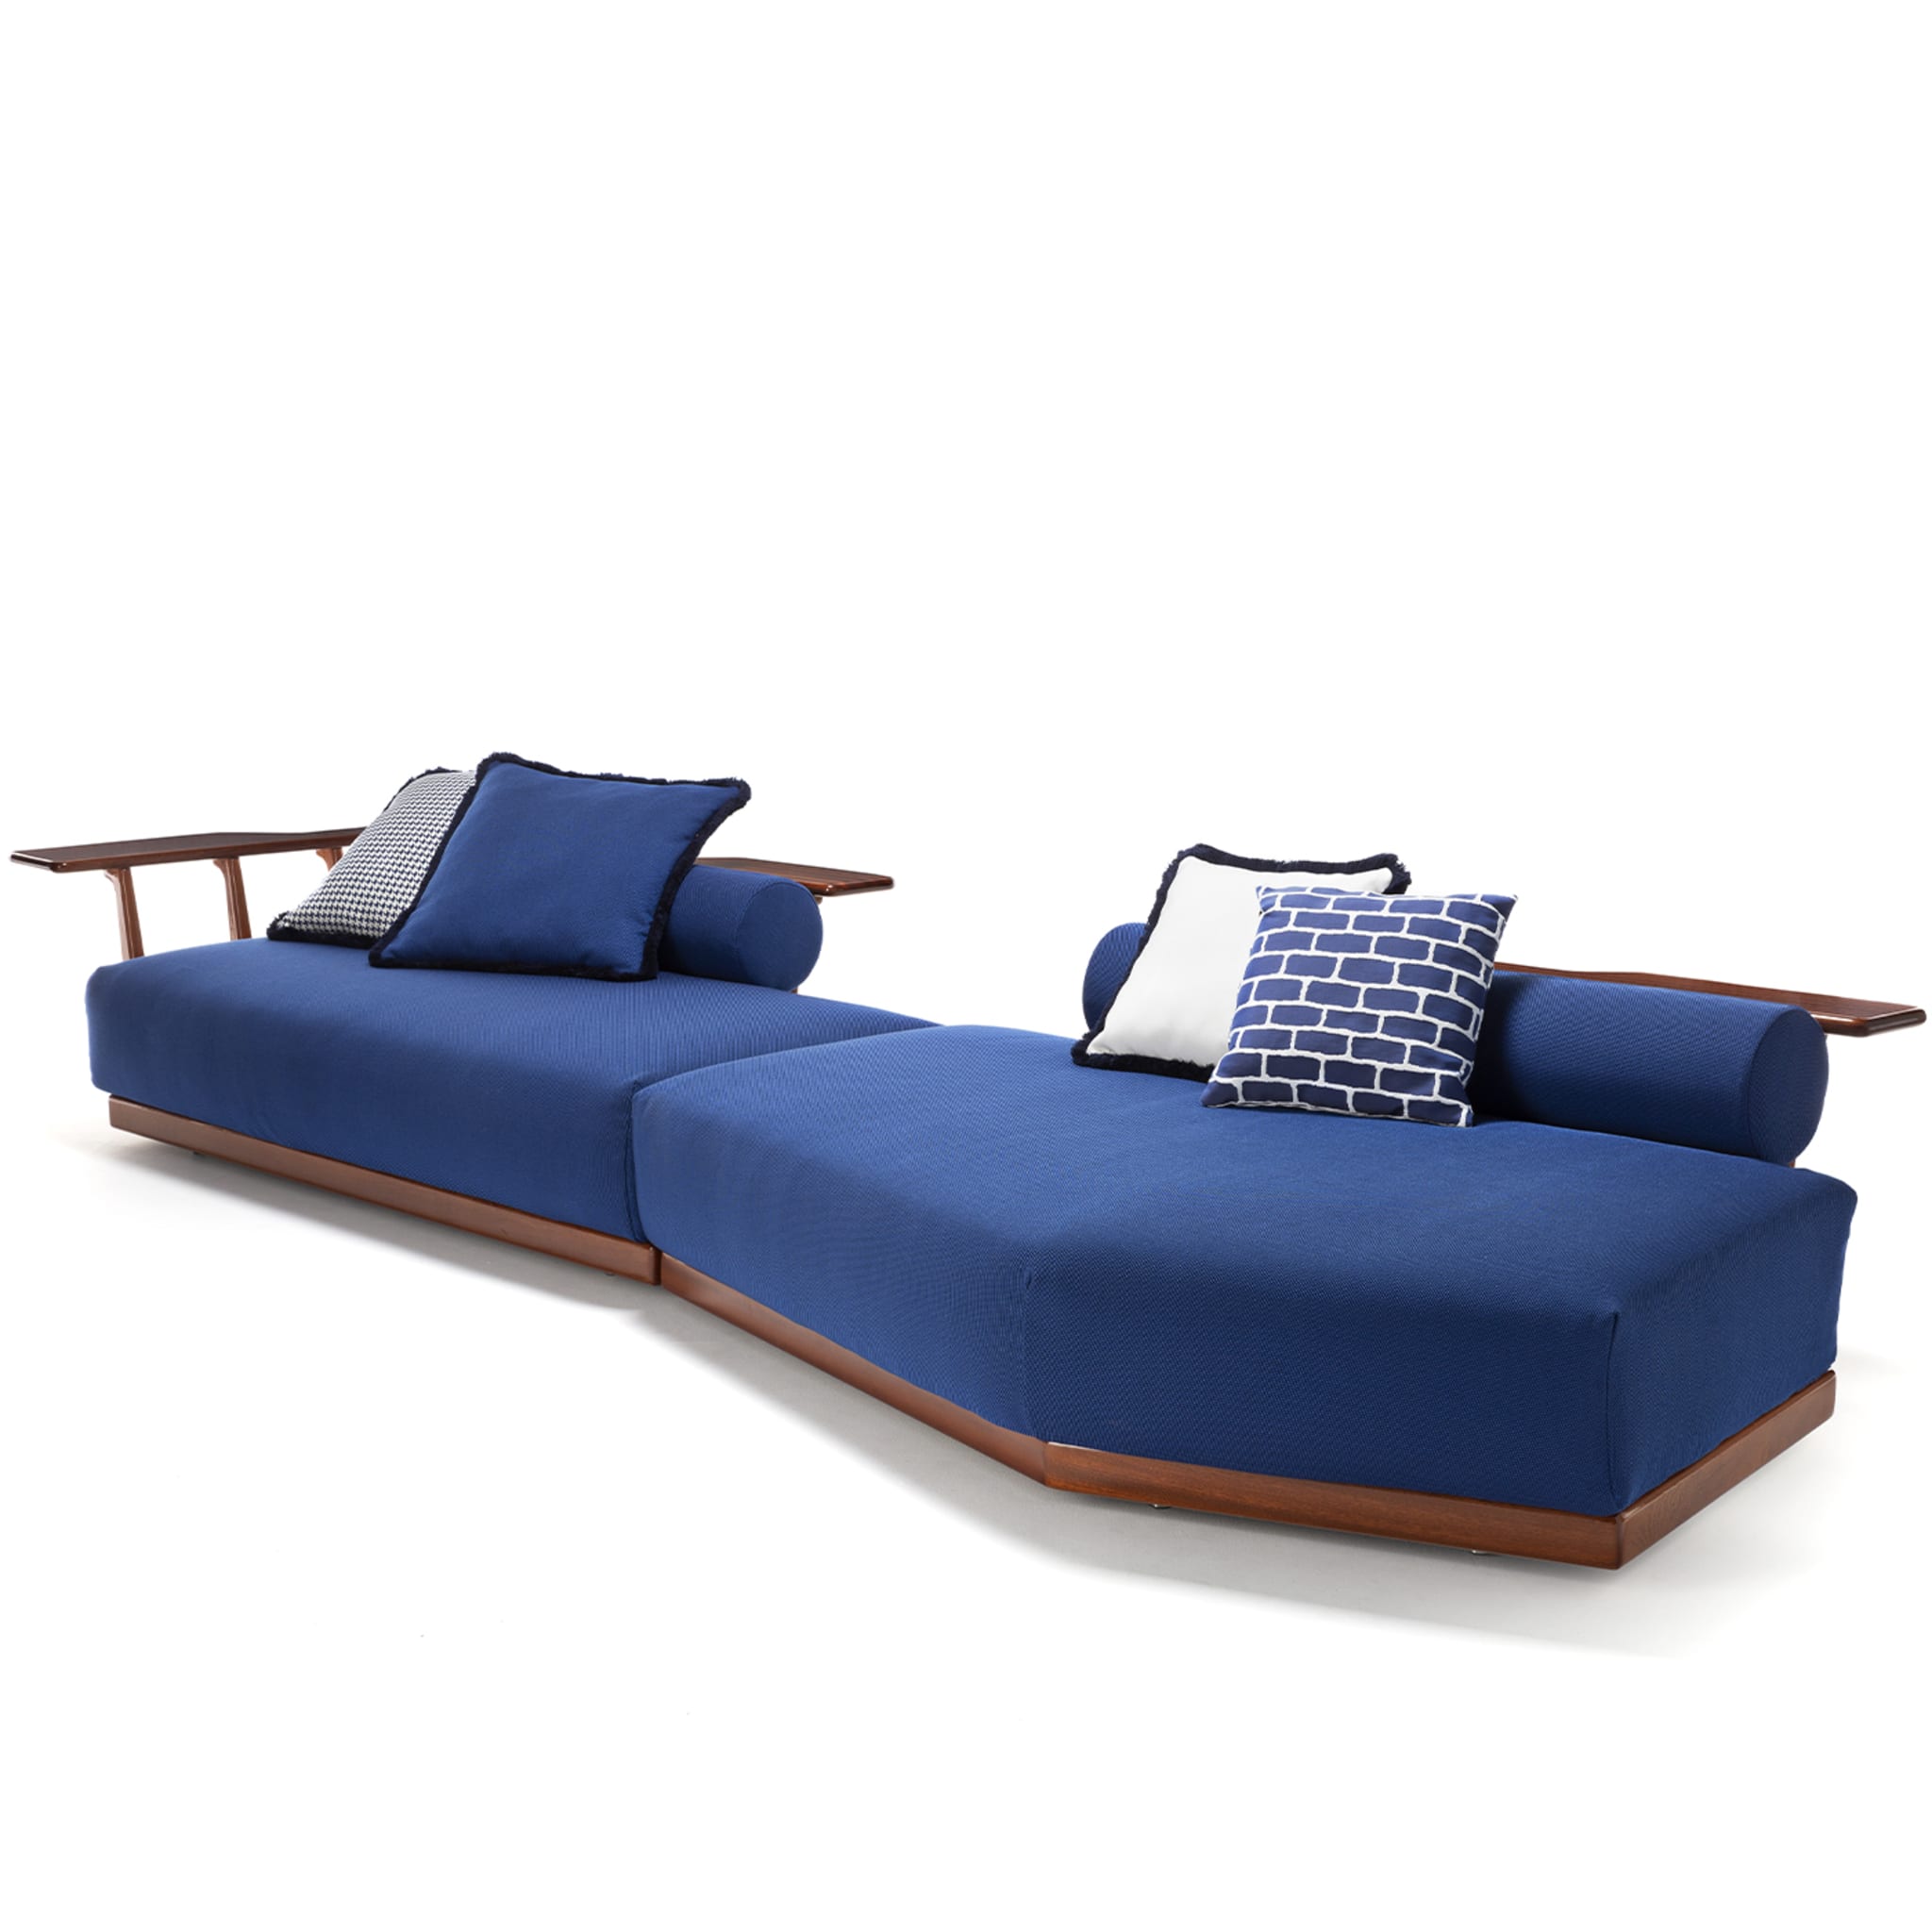 Sunset Platform Sofa with Side Table by Paola Navone - Alternative view 5